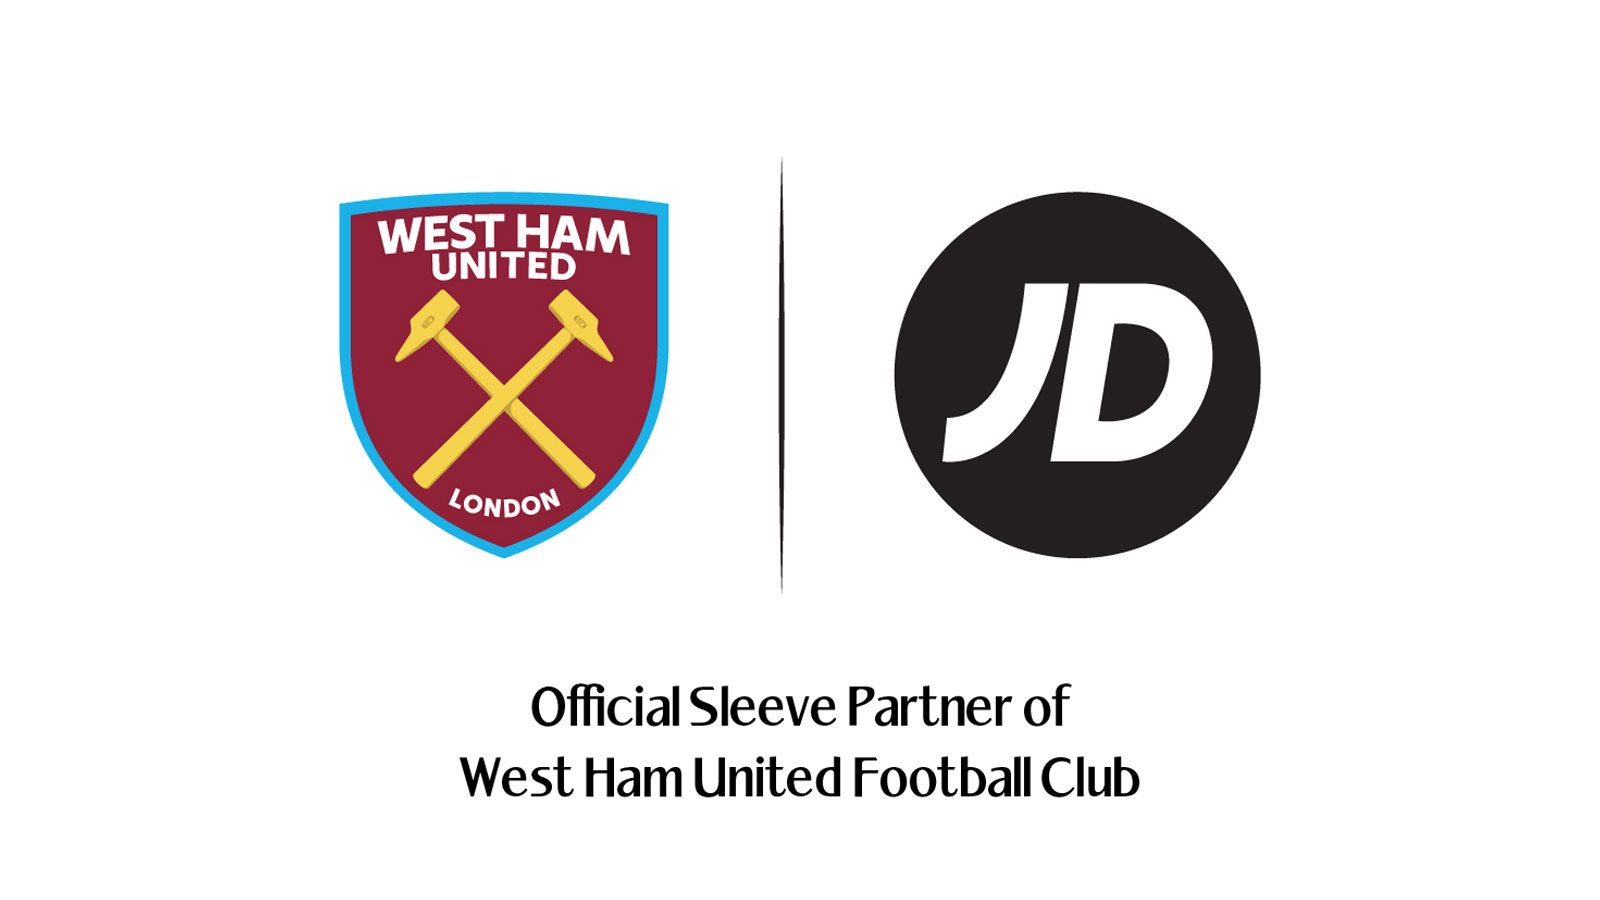 JD announced as official sleeve partner of West Ham United | West Ham ...